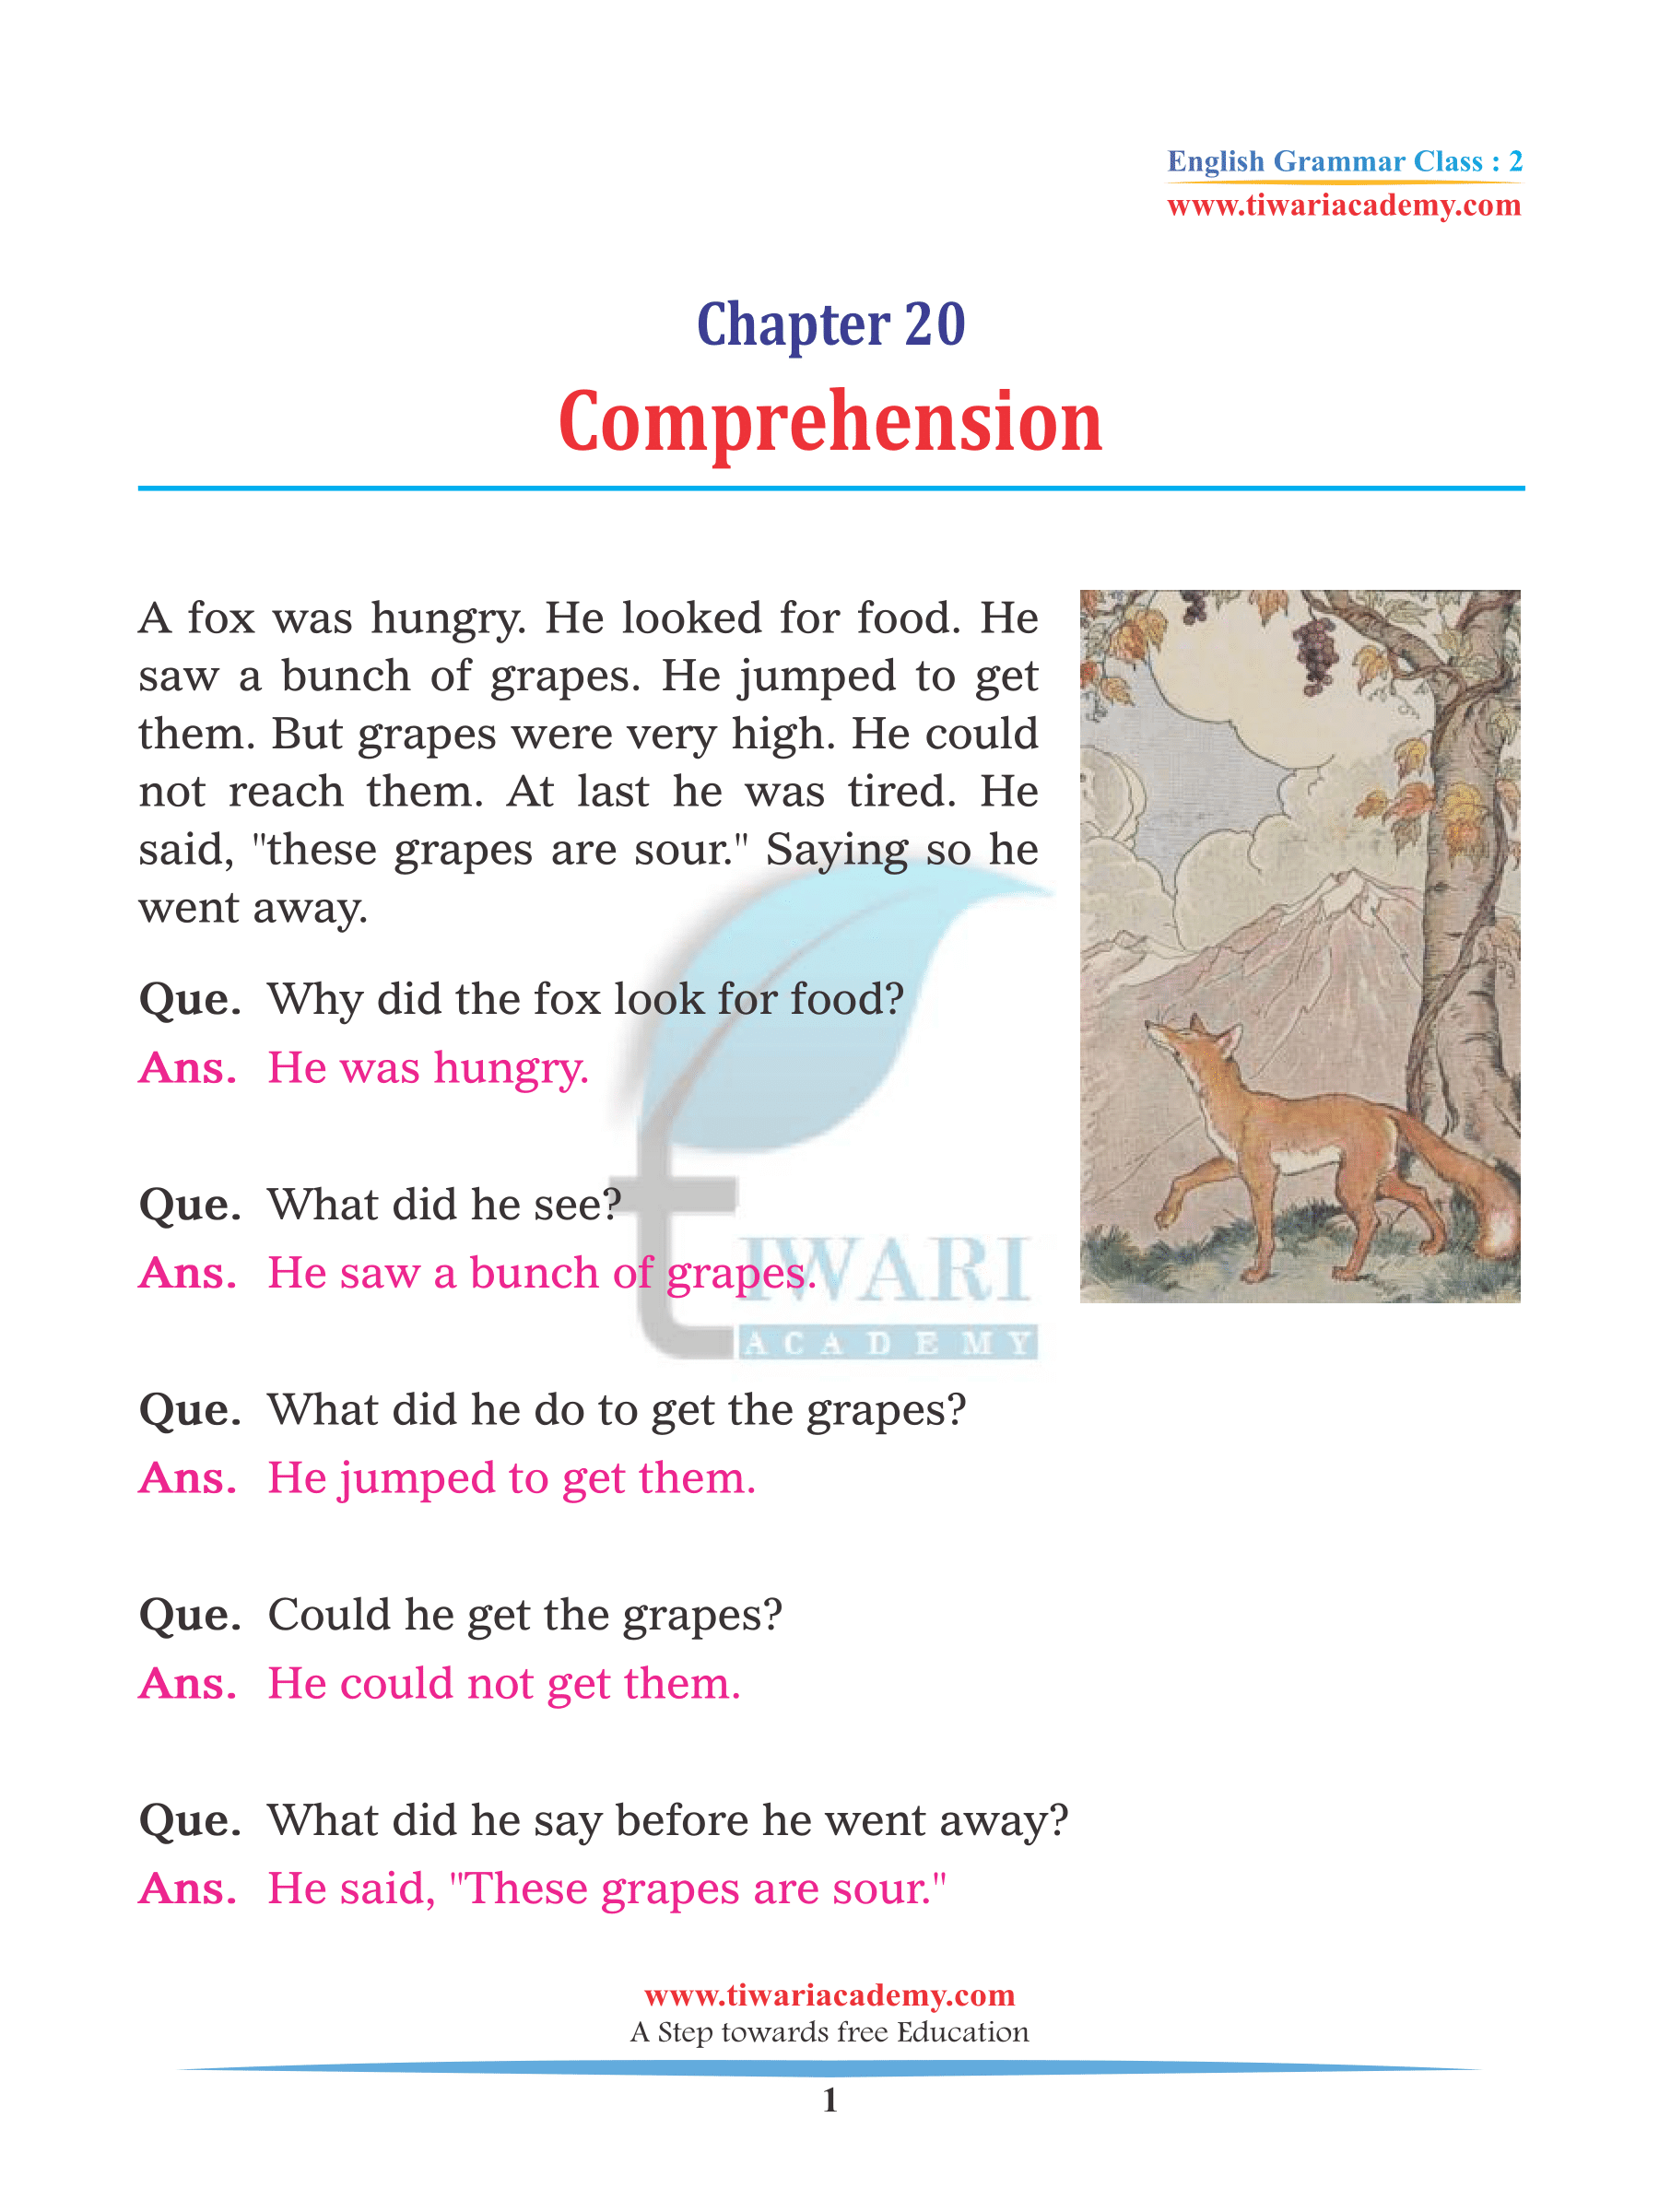 Class 2 English Grammar Chapter 20 Comprehension Practice